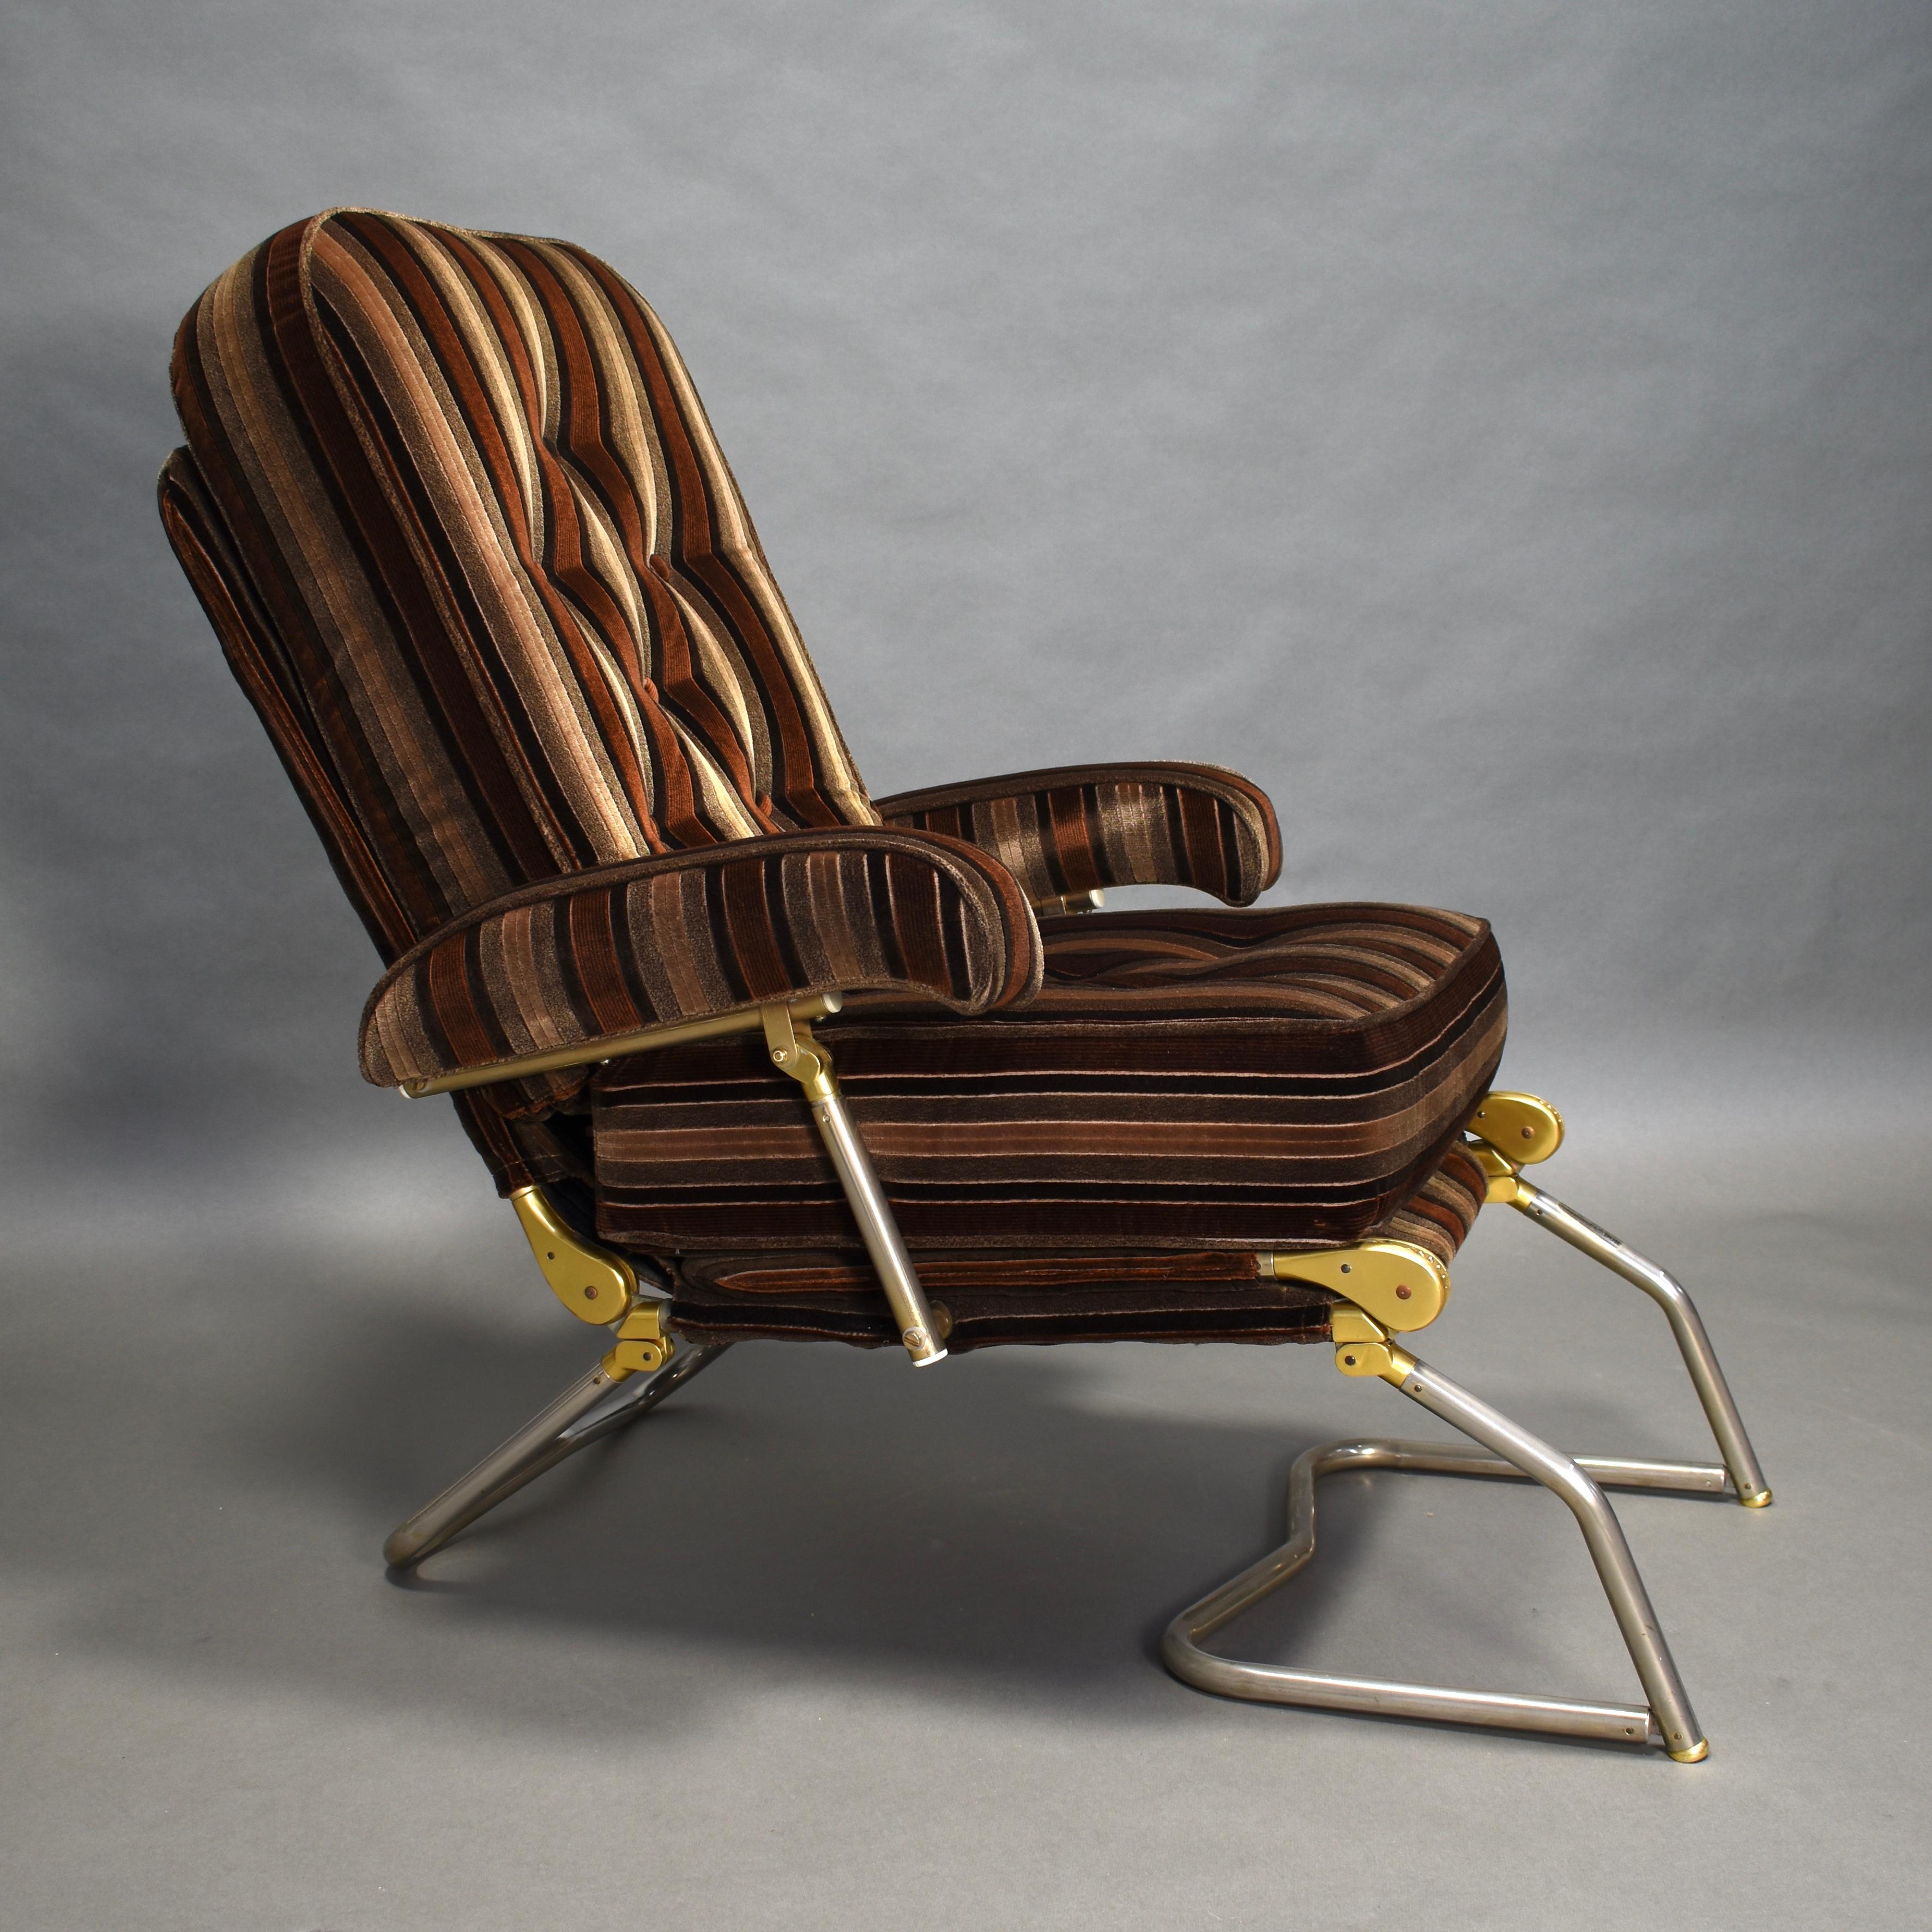 Late 20th Century Daybed Lounge Chair by Condor Paris, Rue La Fayette, France, circa 1970